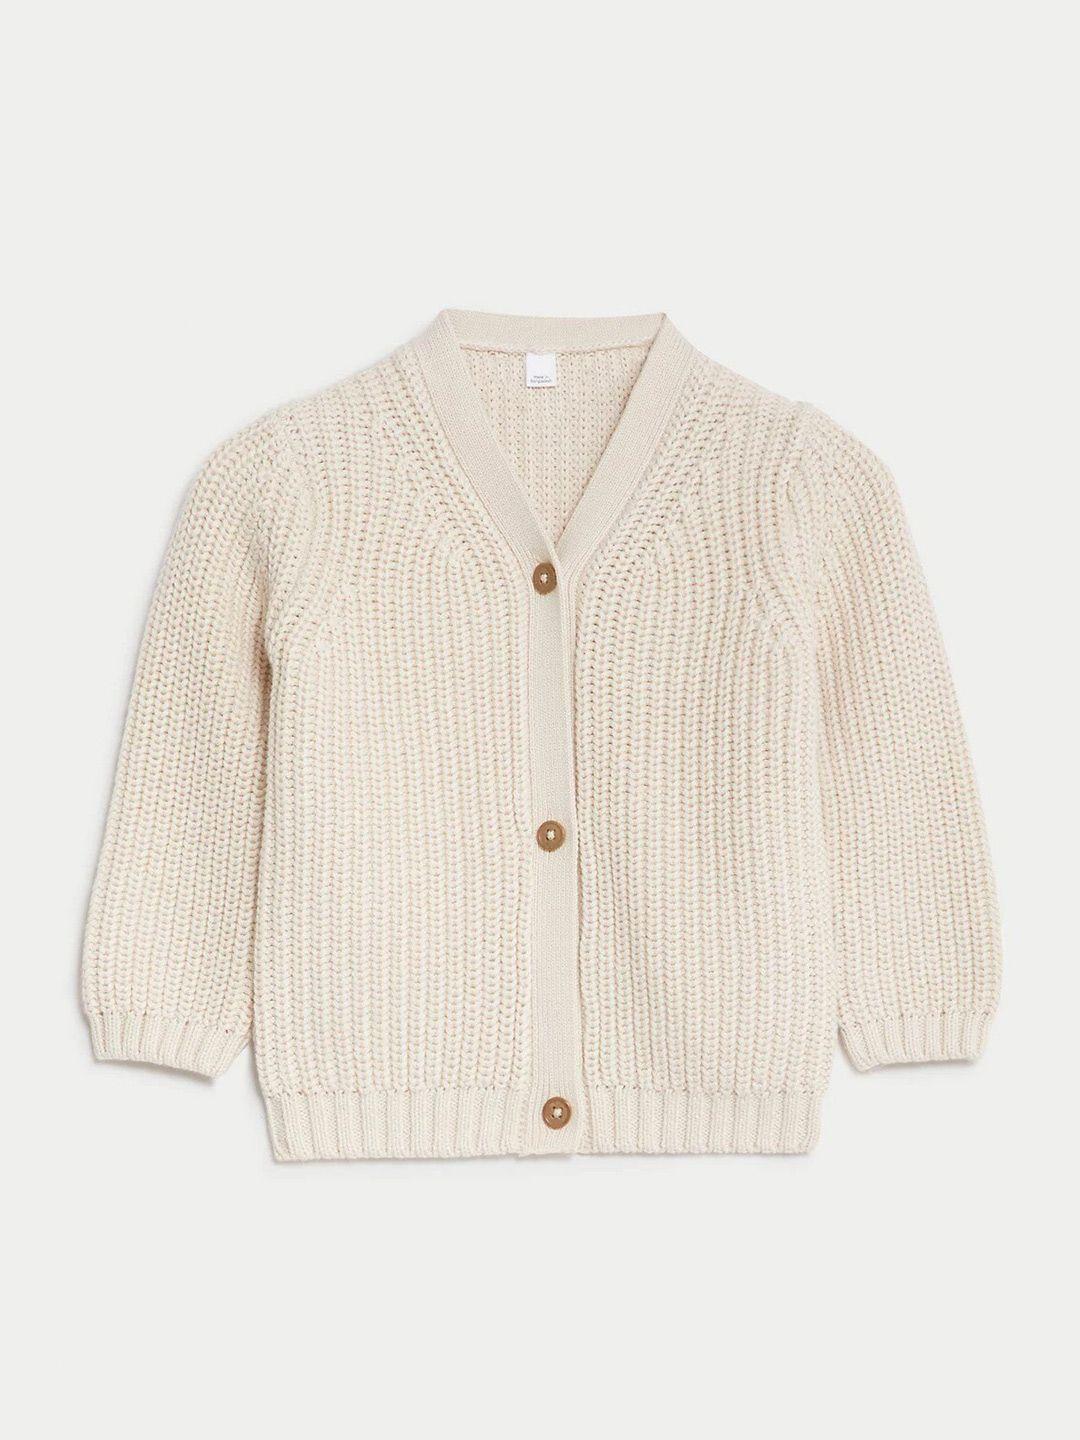 marks & spencer infant boys beige ribbed pure cotton cardigan sweater